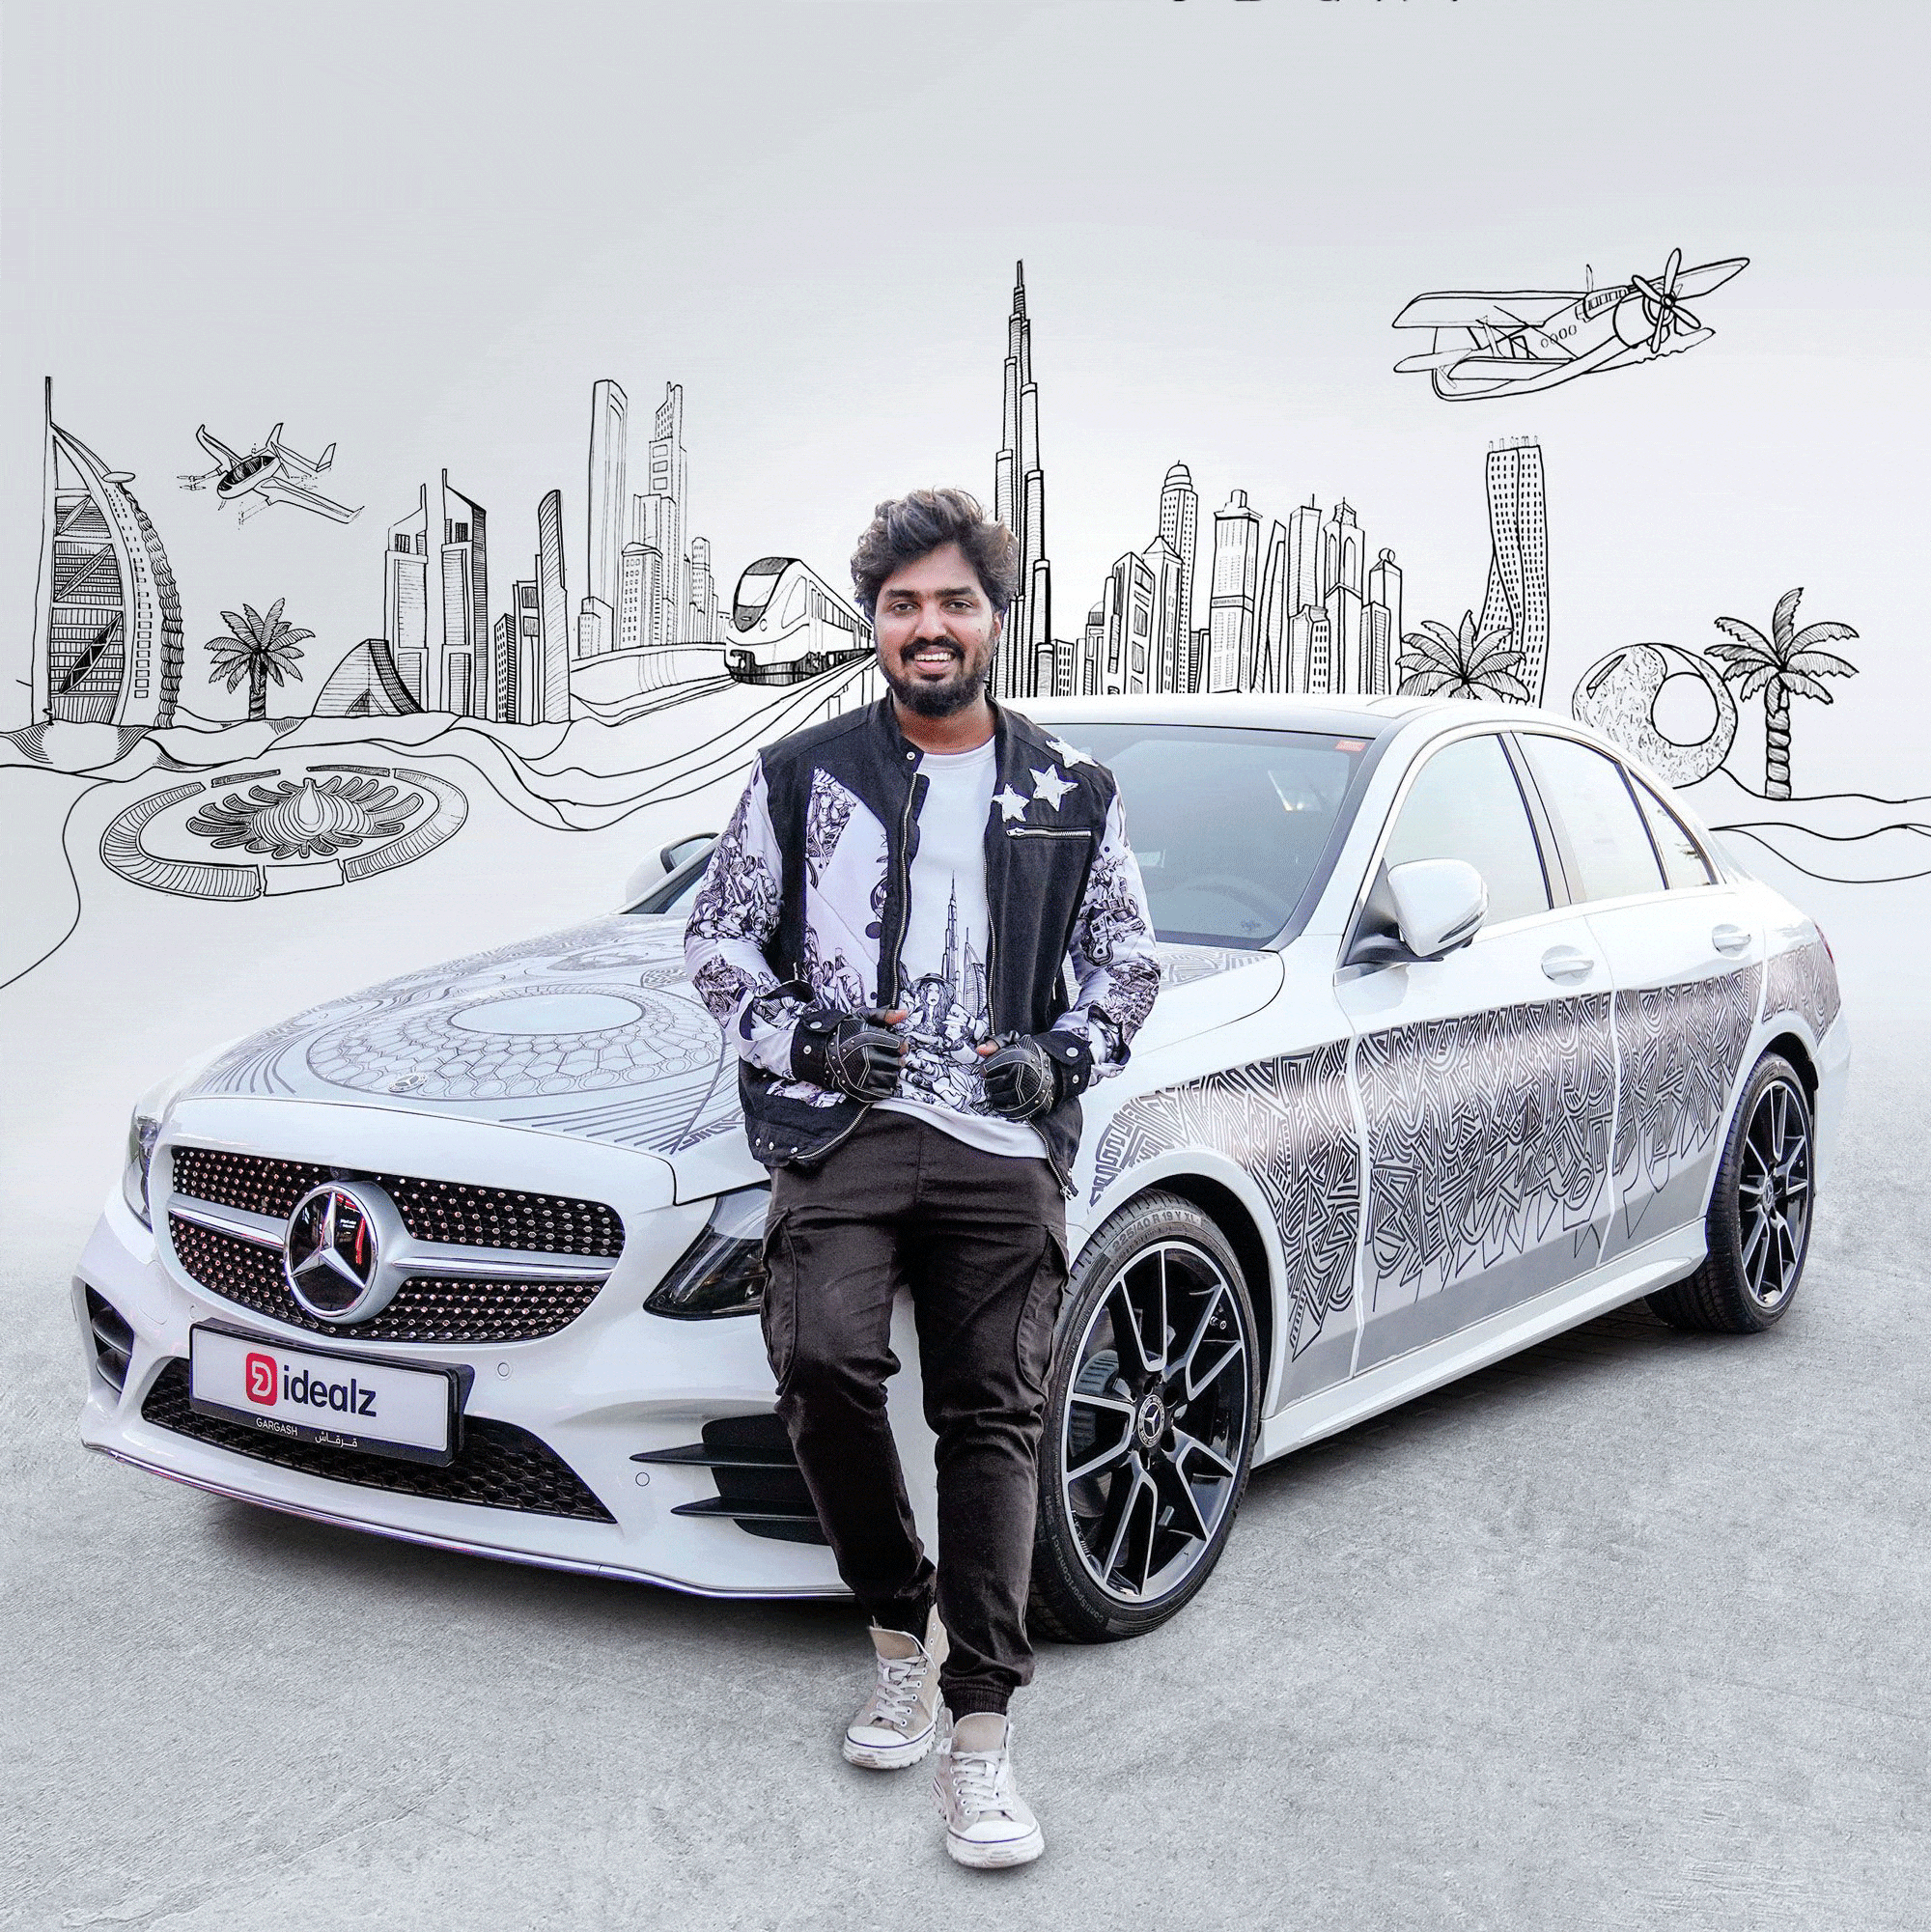 Doodle on a Brand New Mercedes C200 in Dubai